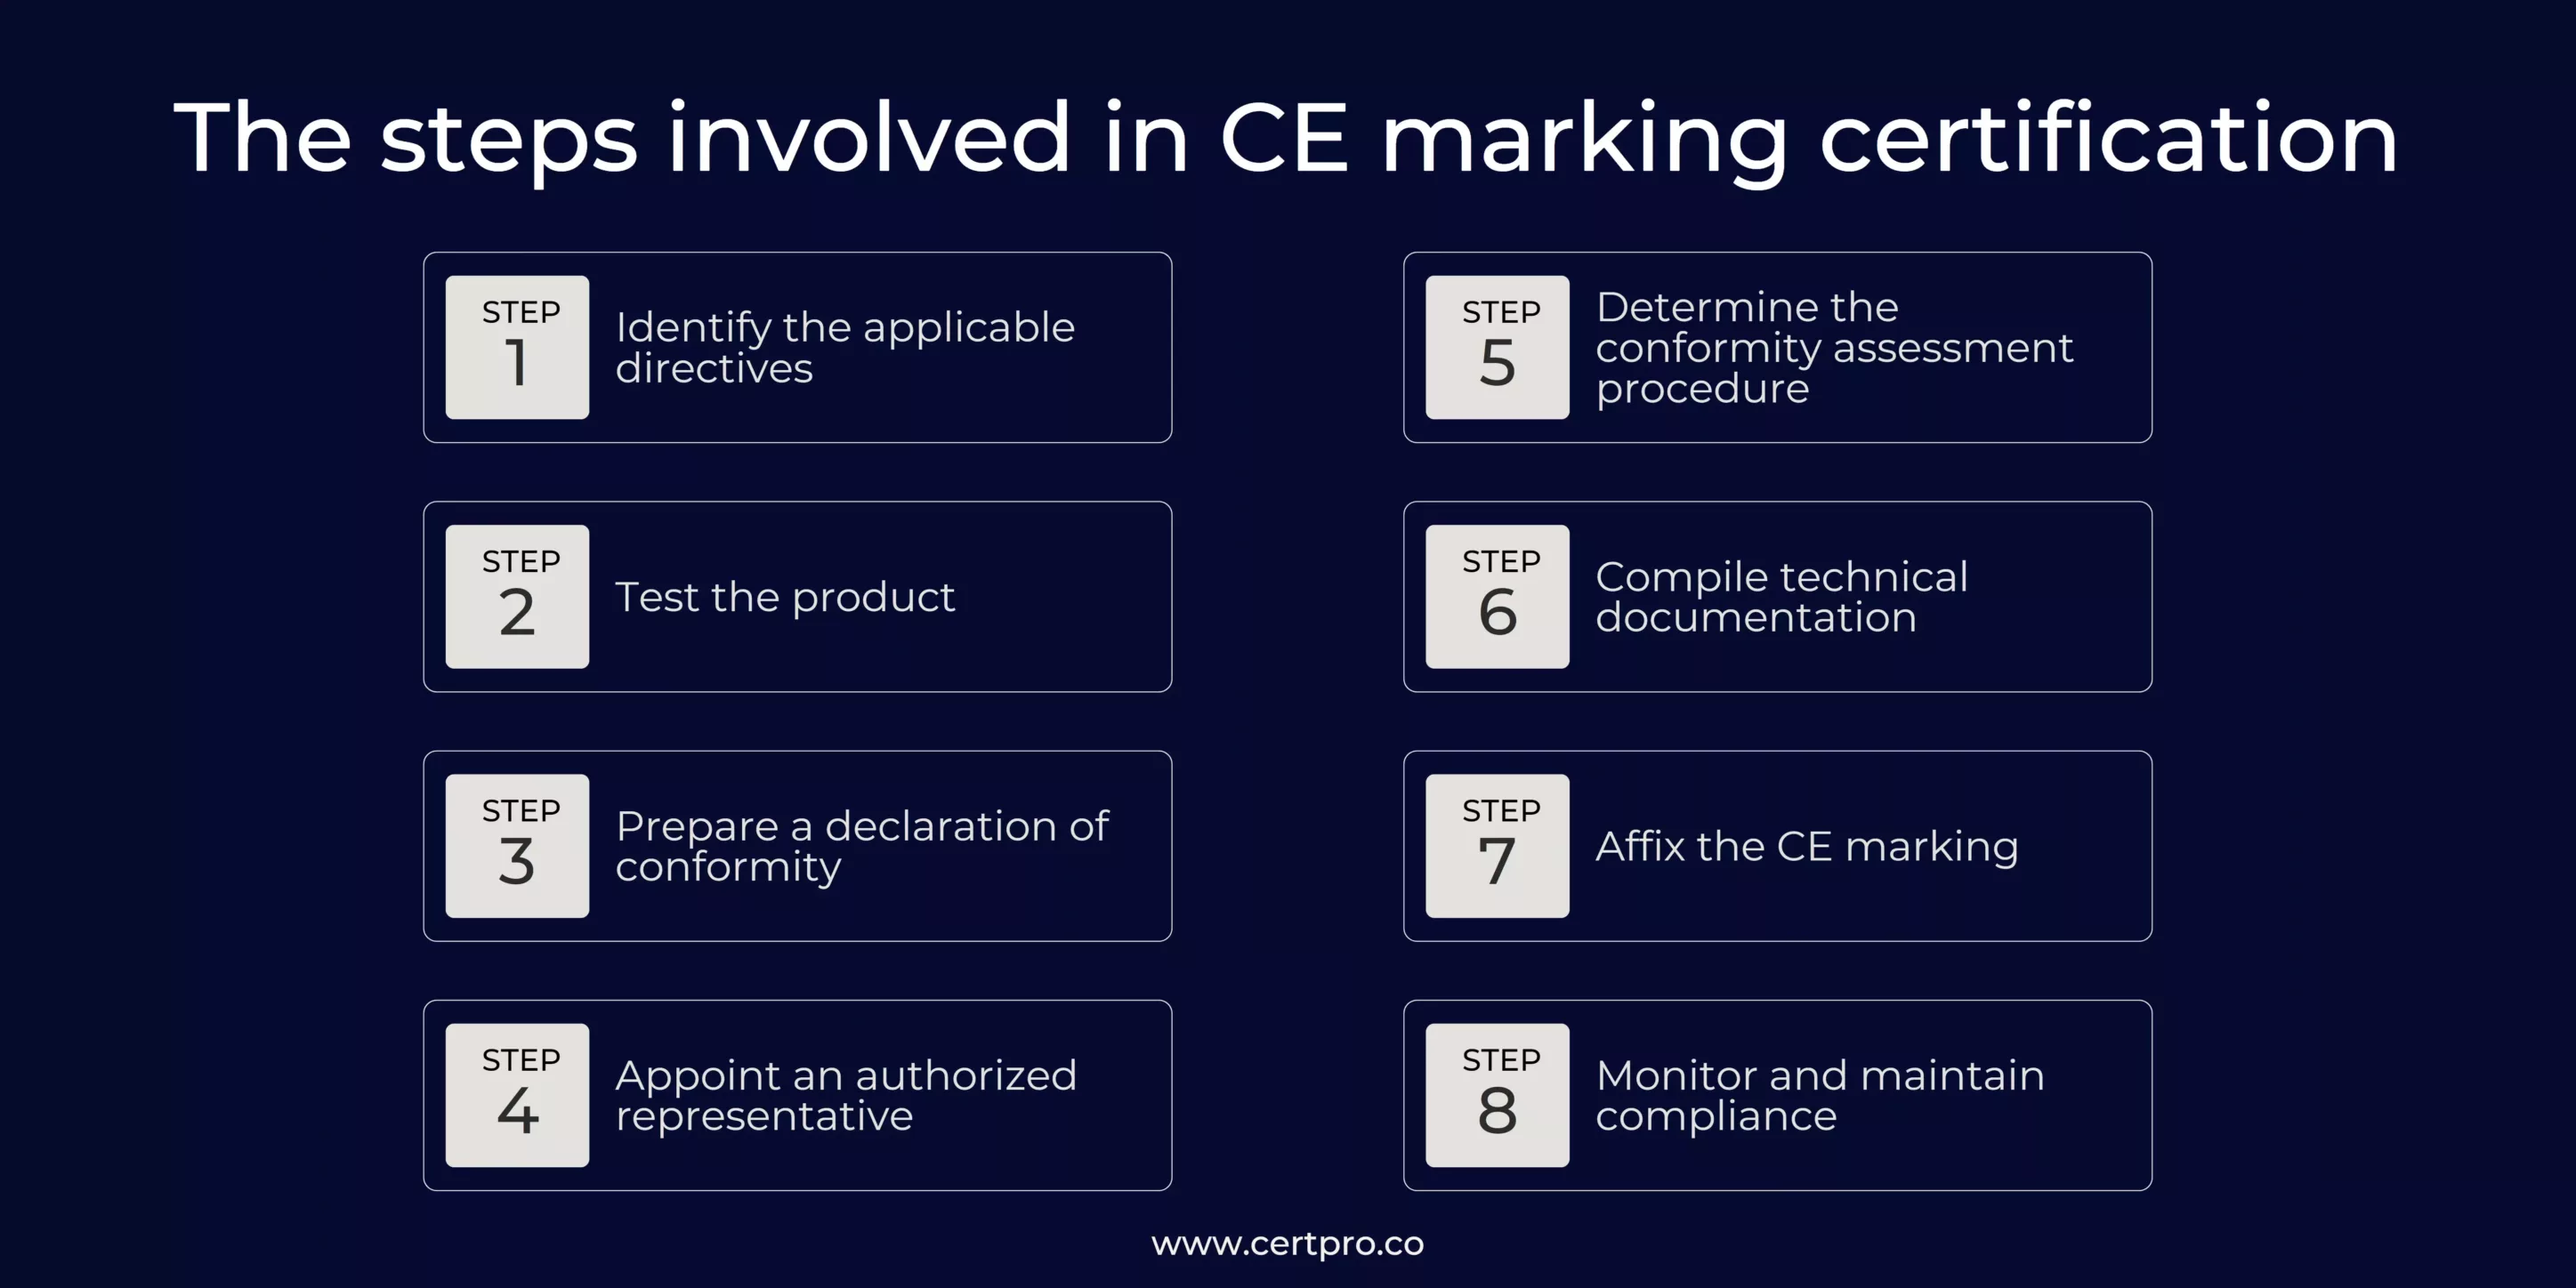 STEPS INVOLVED IN CE MARKING